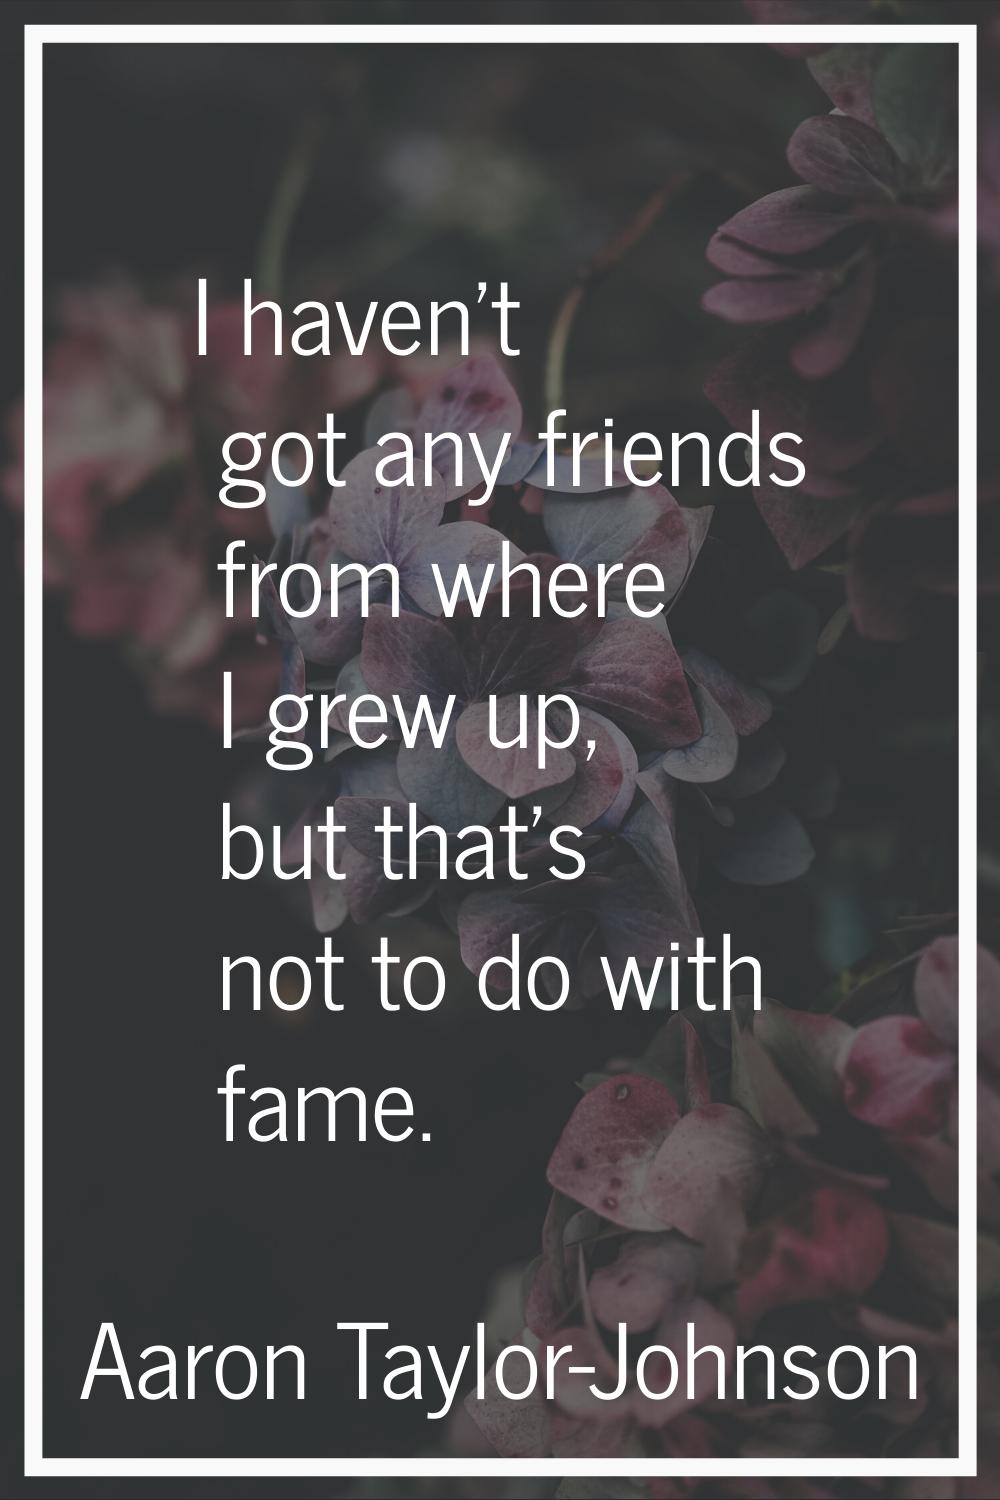 I haven't got any friends from where I grew up, but that's not to do with fame.